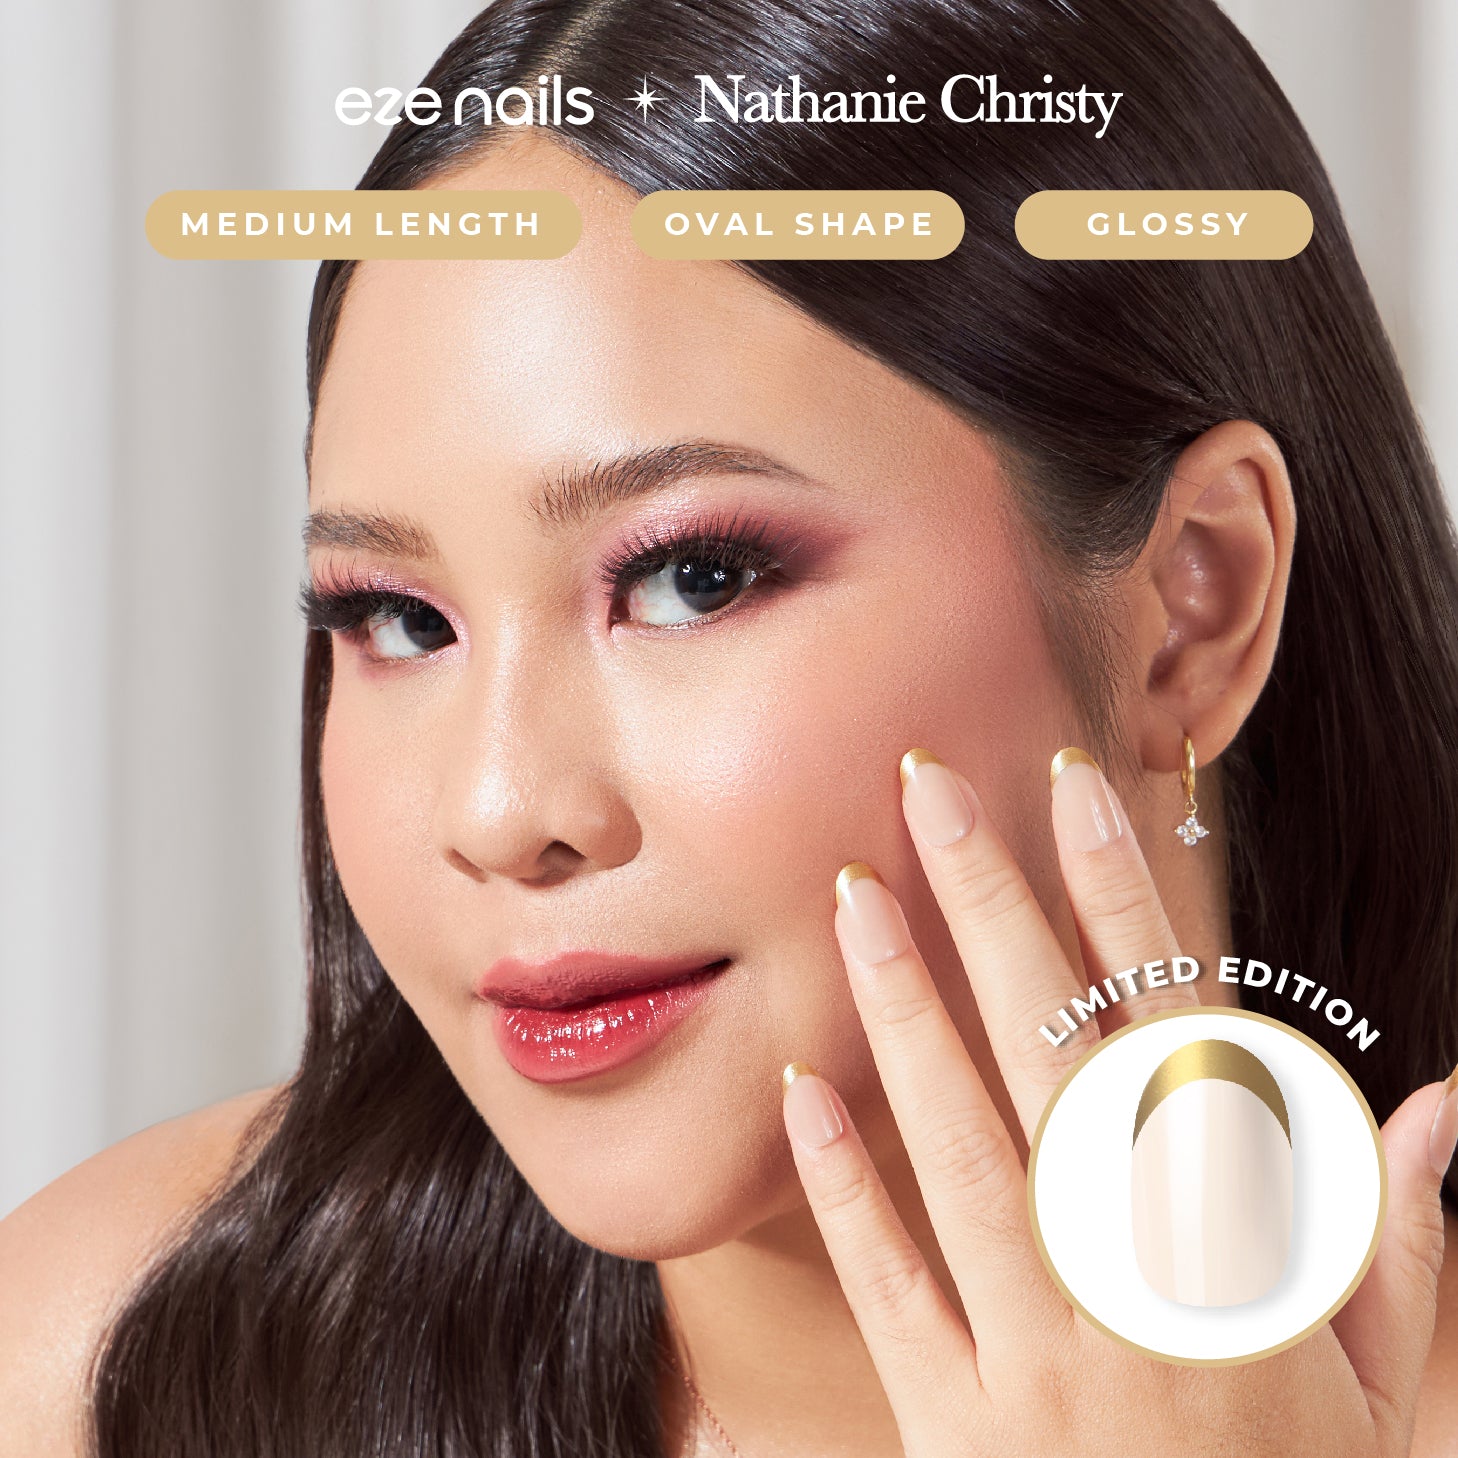 Eze Nails x Nathanie Christy - Magnetic in Gold Spot on Manicure (Kuku Tempel Tangan)